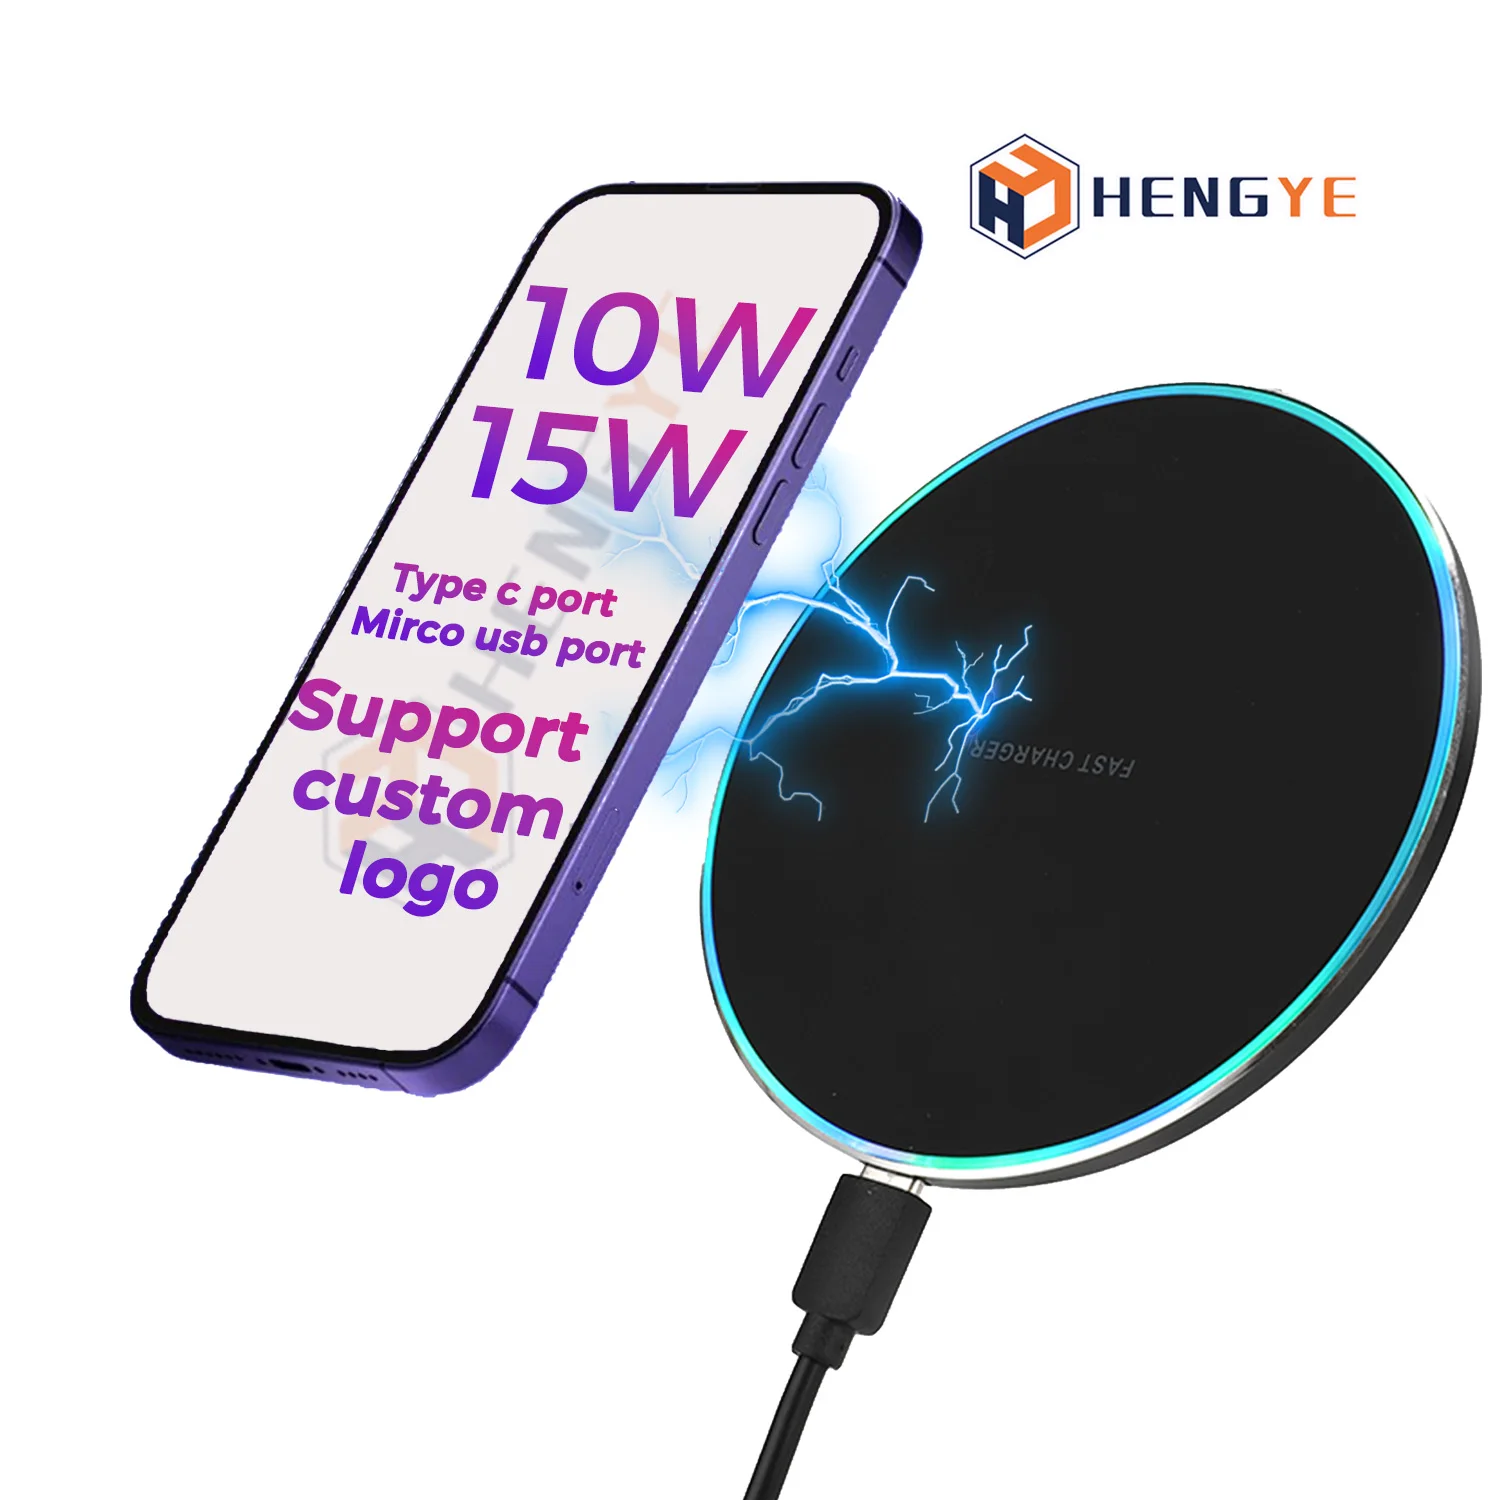 

High Quality Mobile Phone Universal Wireless Fast Charging Pad Qi 10W 15W Smart Wireless Charger